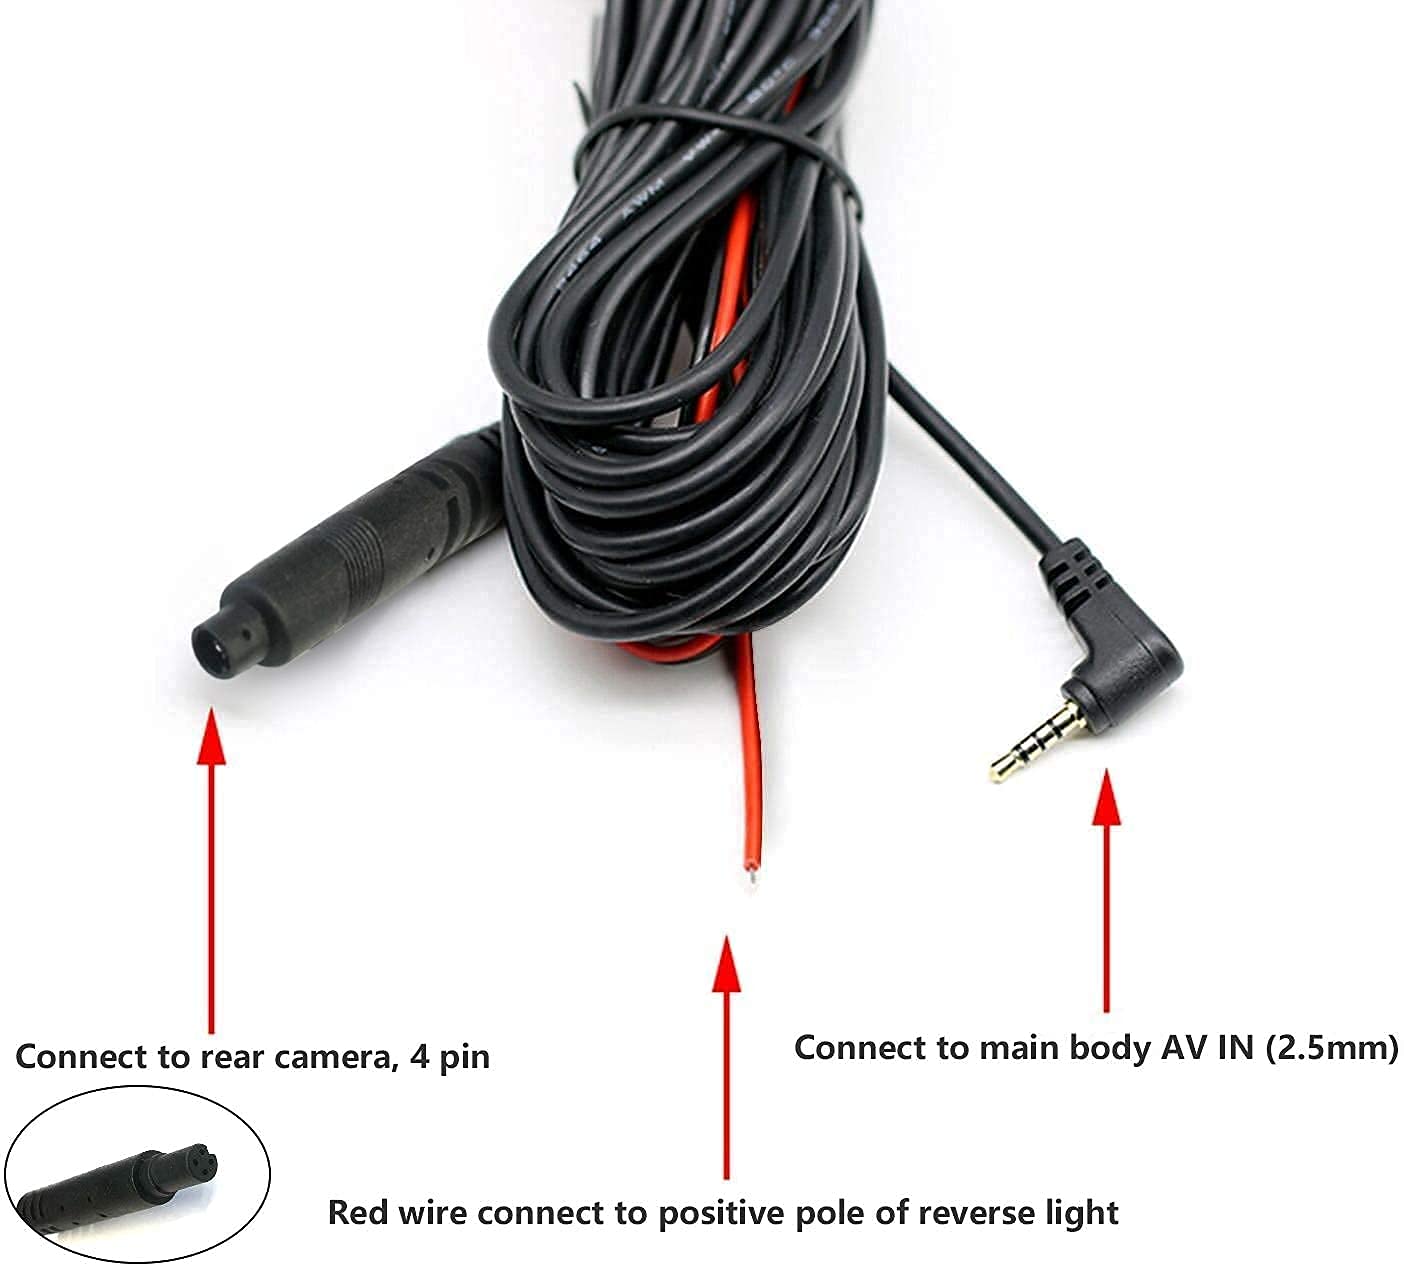 WOLFBOX 33Feet G840S / G930 / G910 / G840H / G850 / G900 / T10 Plus Rear Camera Extension Cord Cable (4 pin,2.5mm), not Suitable for G700 / G880